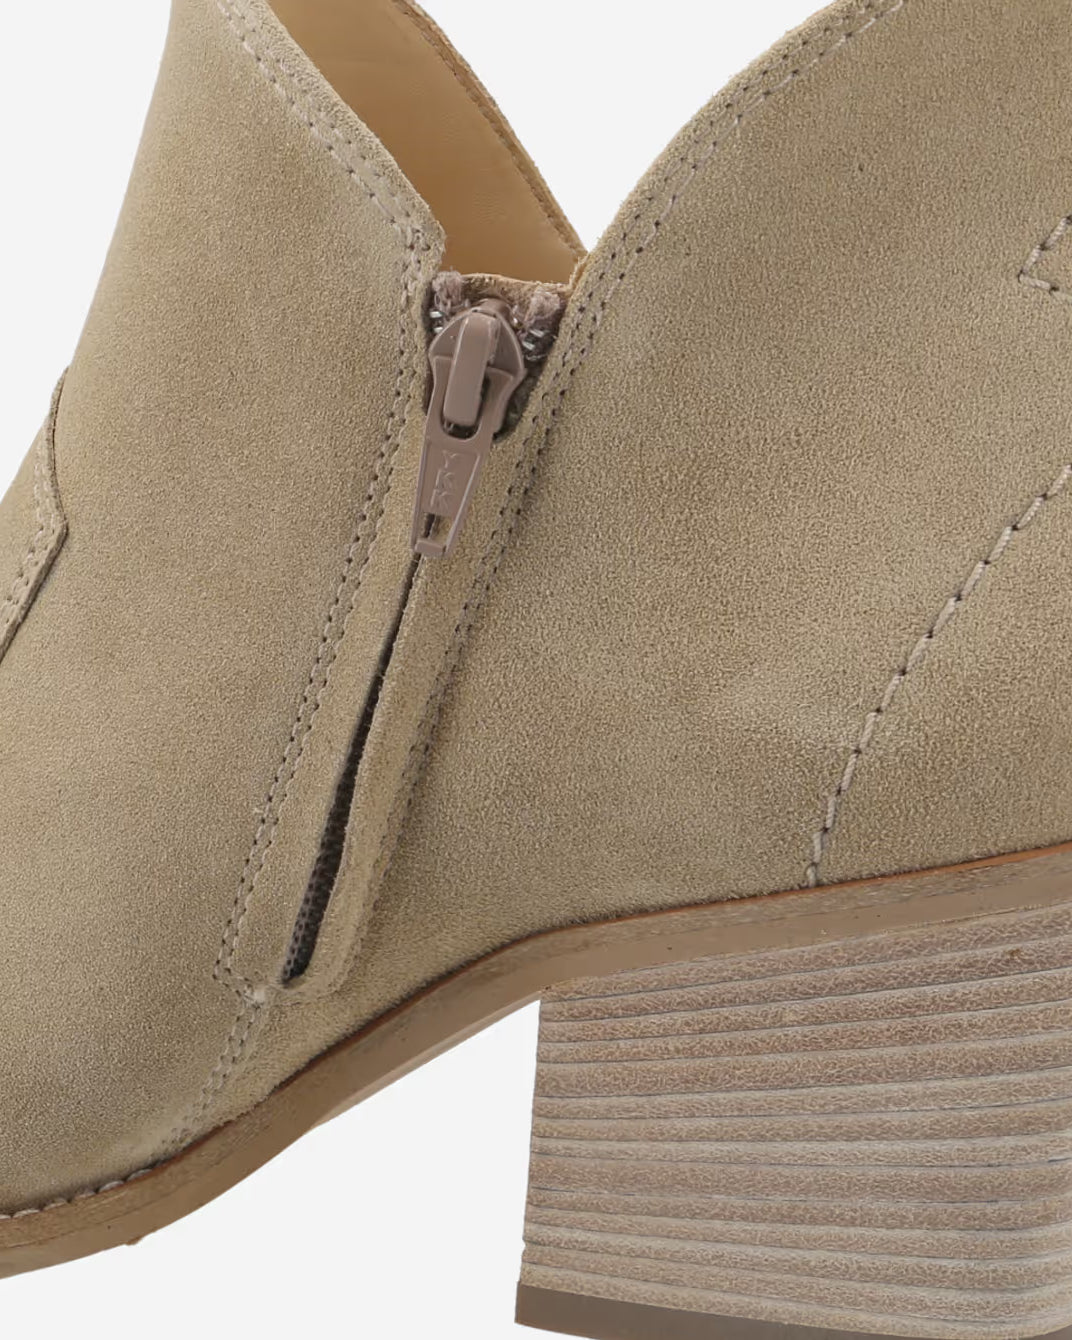 Paul Green Beige Western Style Suede Ankle Boots